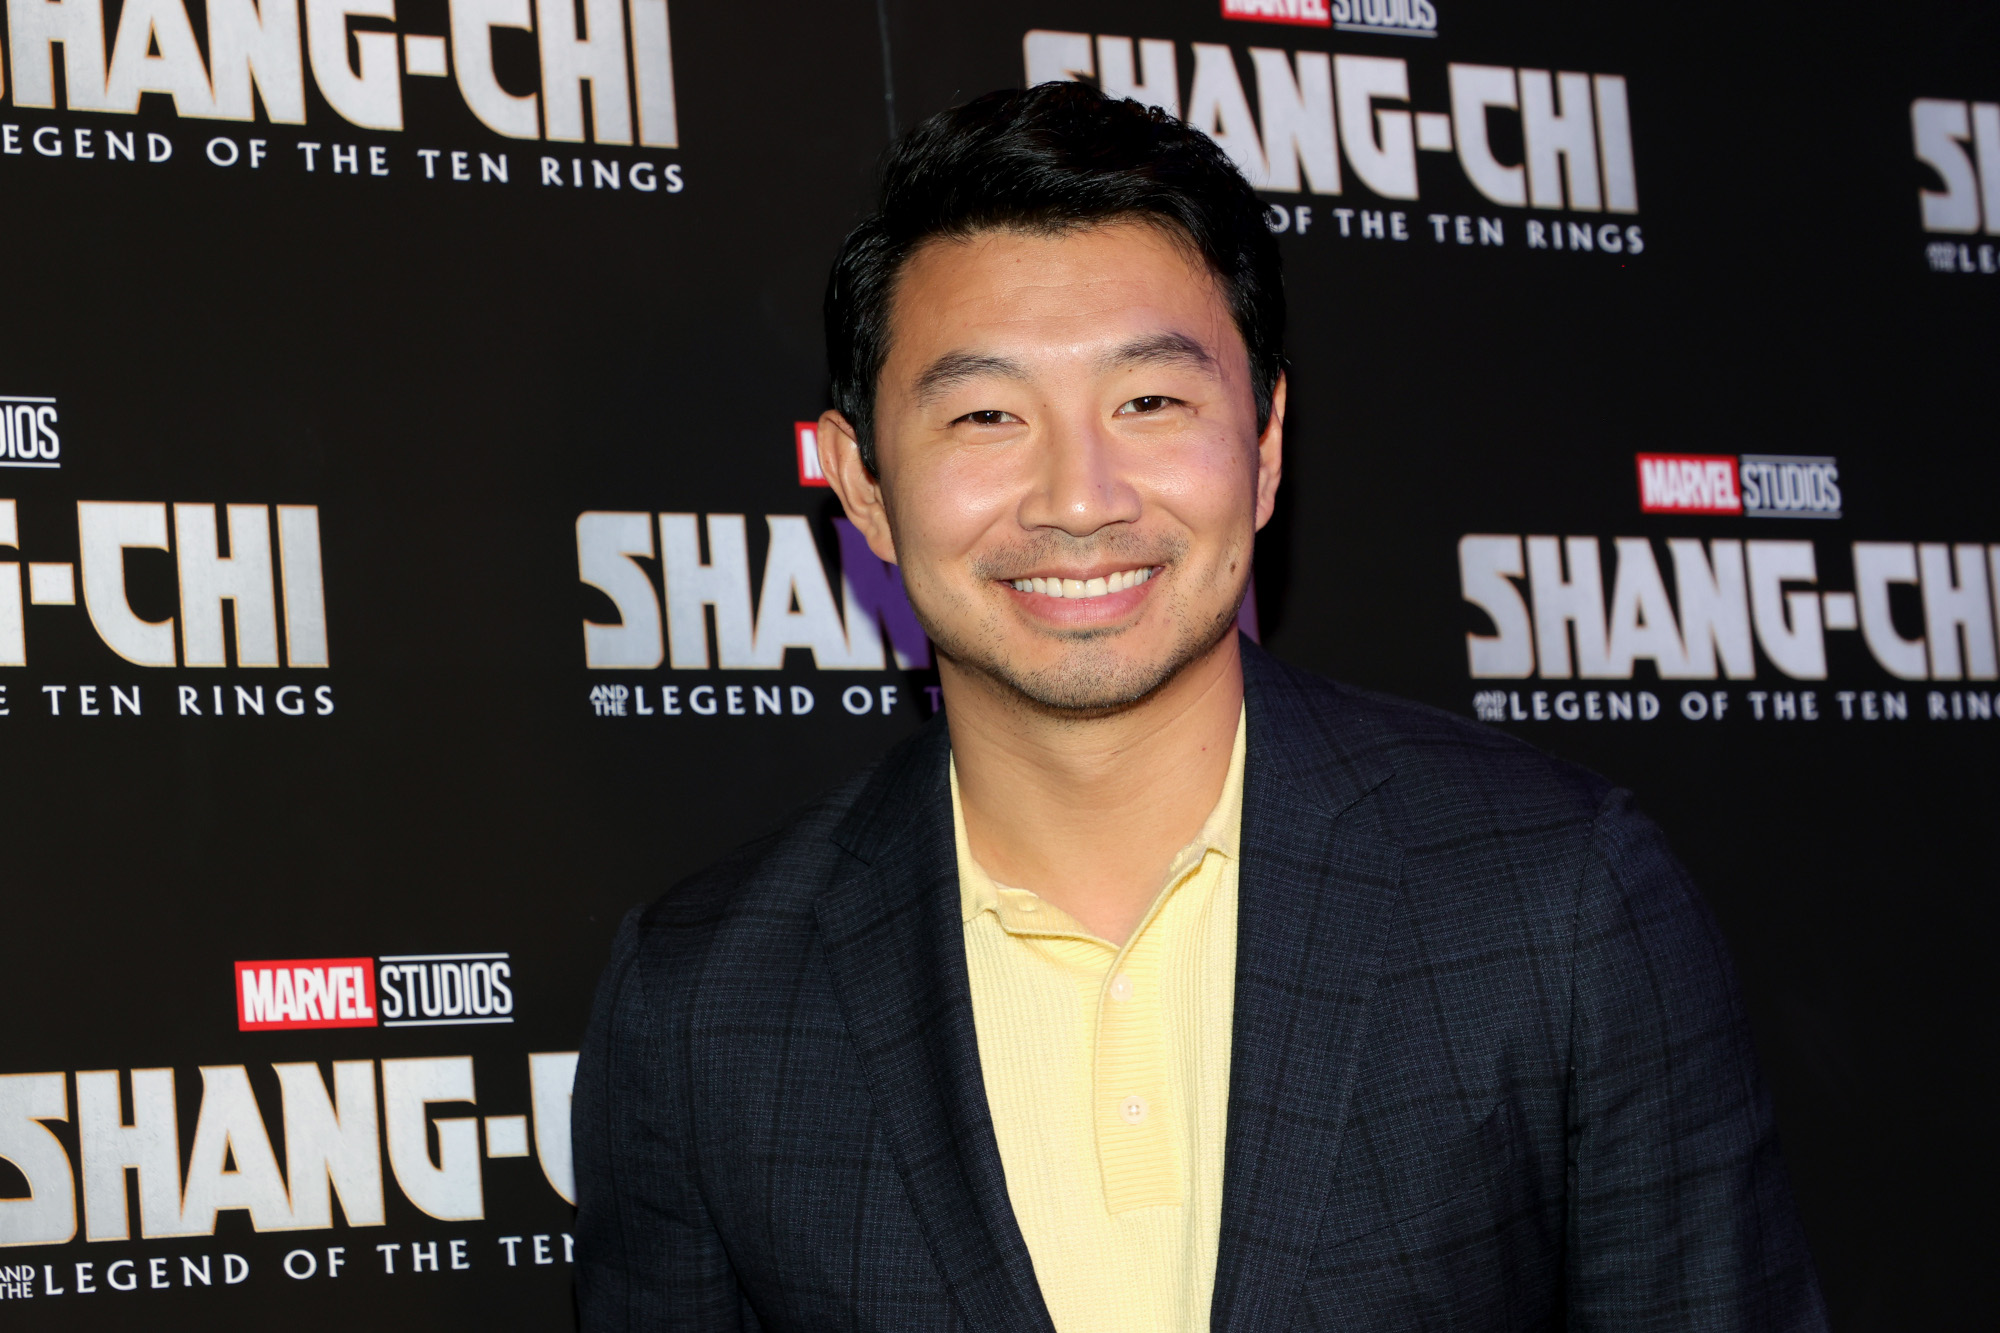 'Shang-Chi and the Legend of the Ten Rings' star Simu Liu. He's wearing a yellow button-up shirt and black jacket. He's smiling at the camera and standing in front of a wall with the 'Shang-Chi' logo all over it.